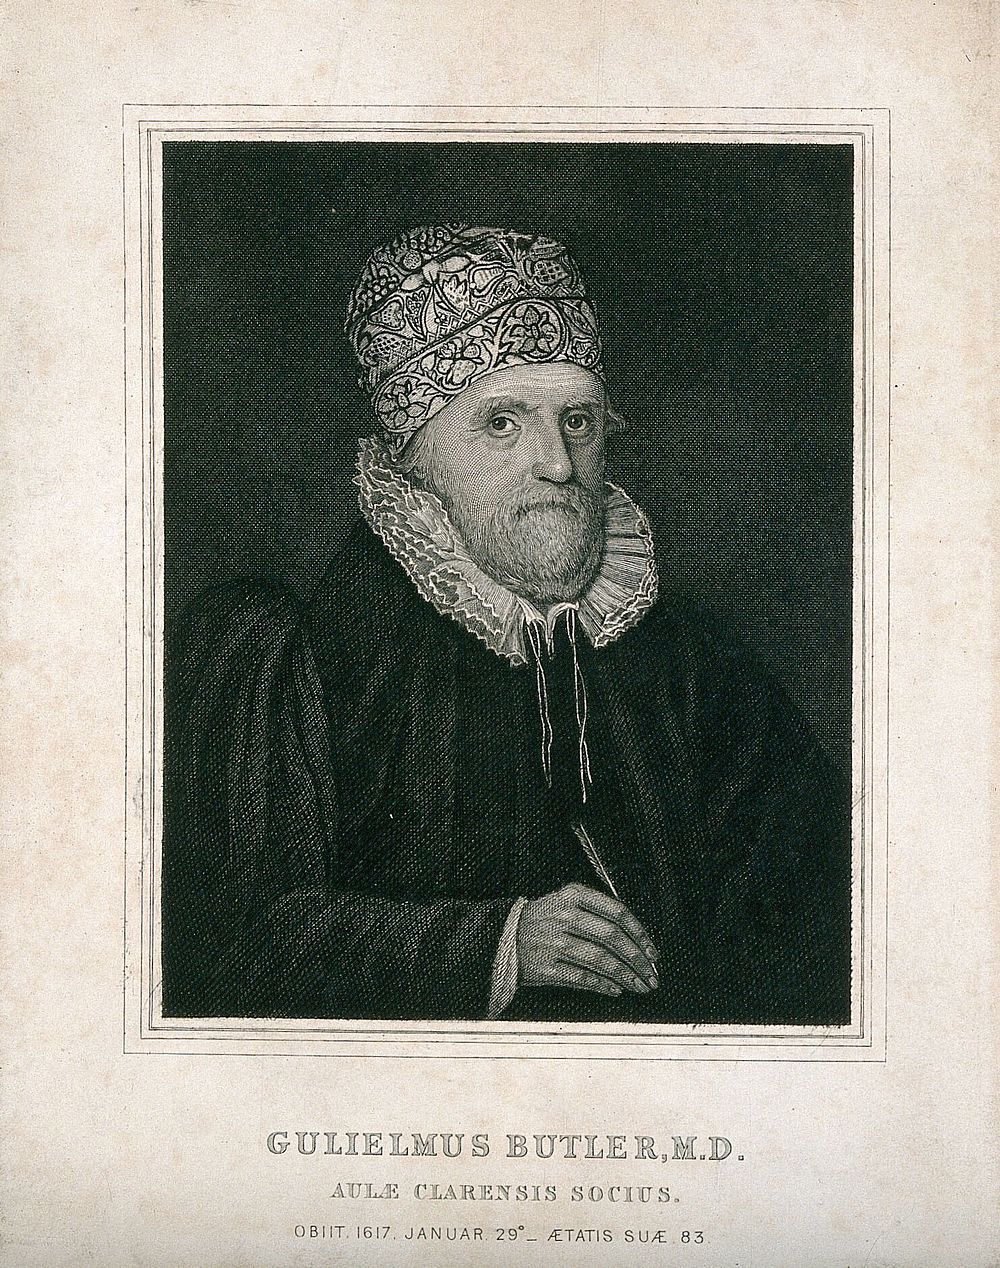 William Butler. Stipple engraving by R. Clamp, 1796, after S. Harding.